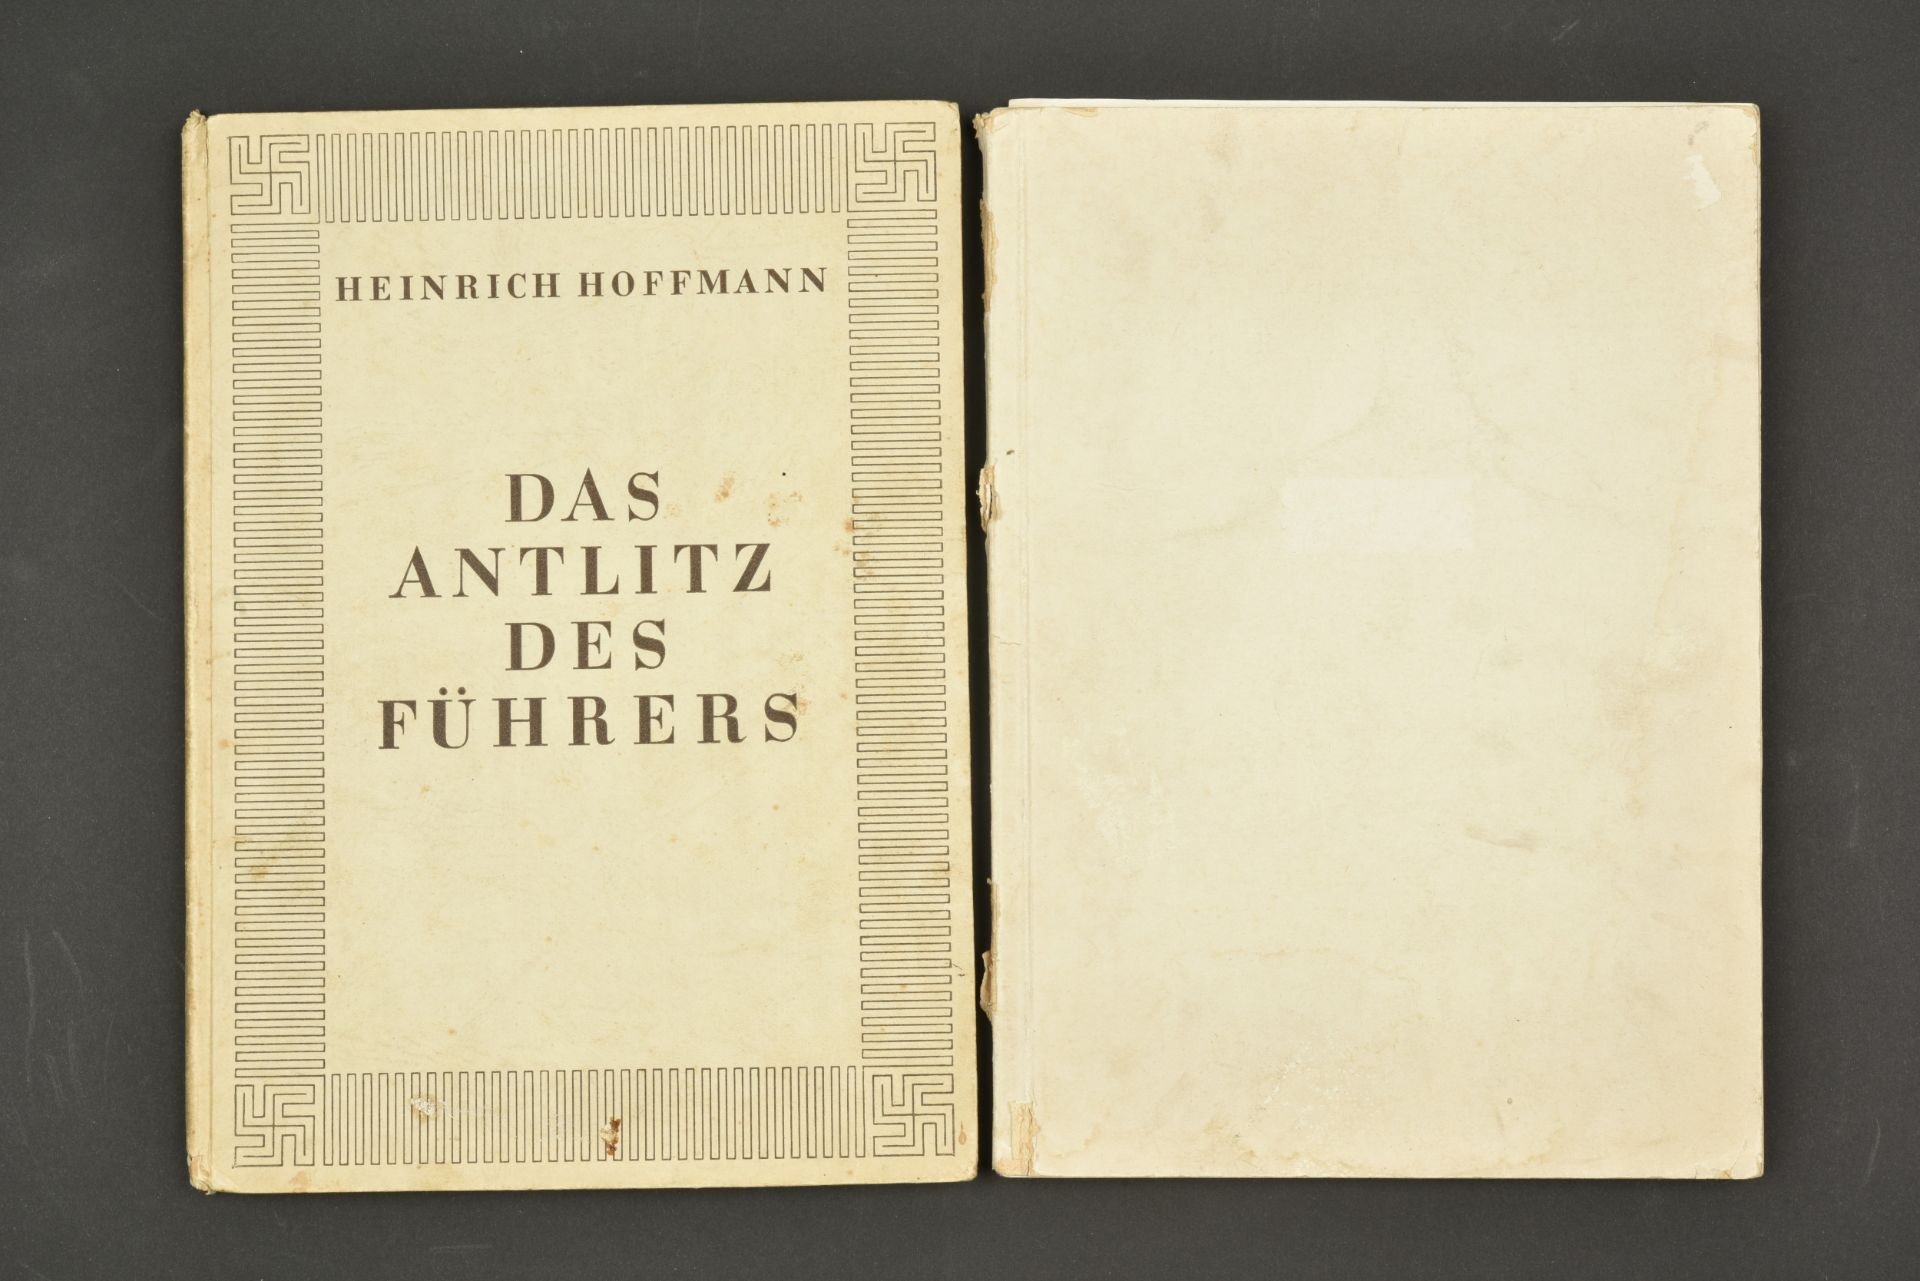 Ouvrages allemand. German books. 